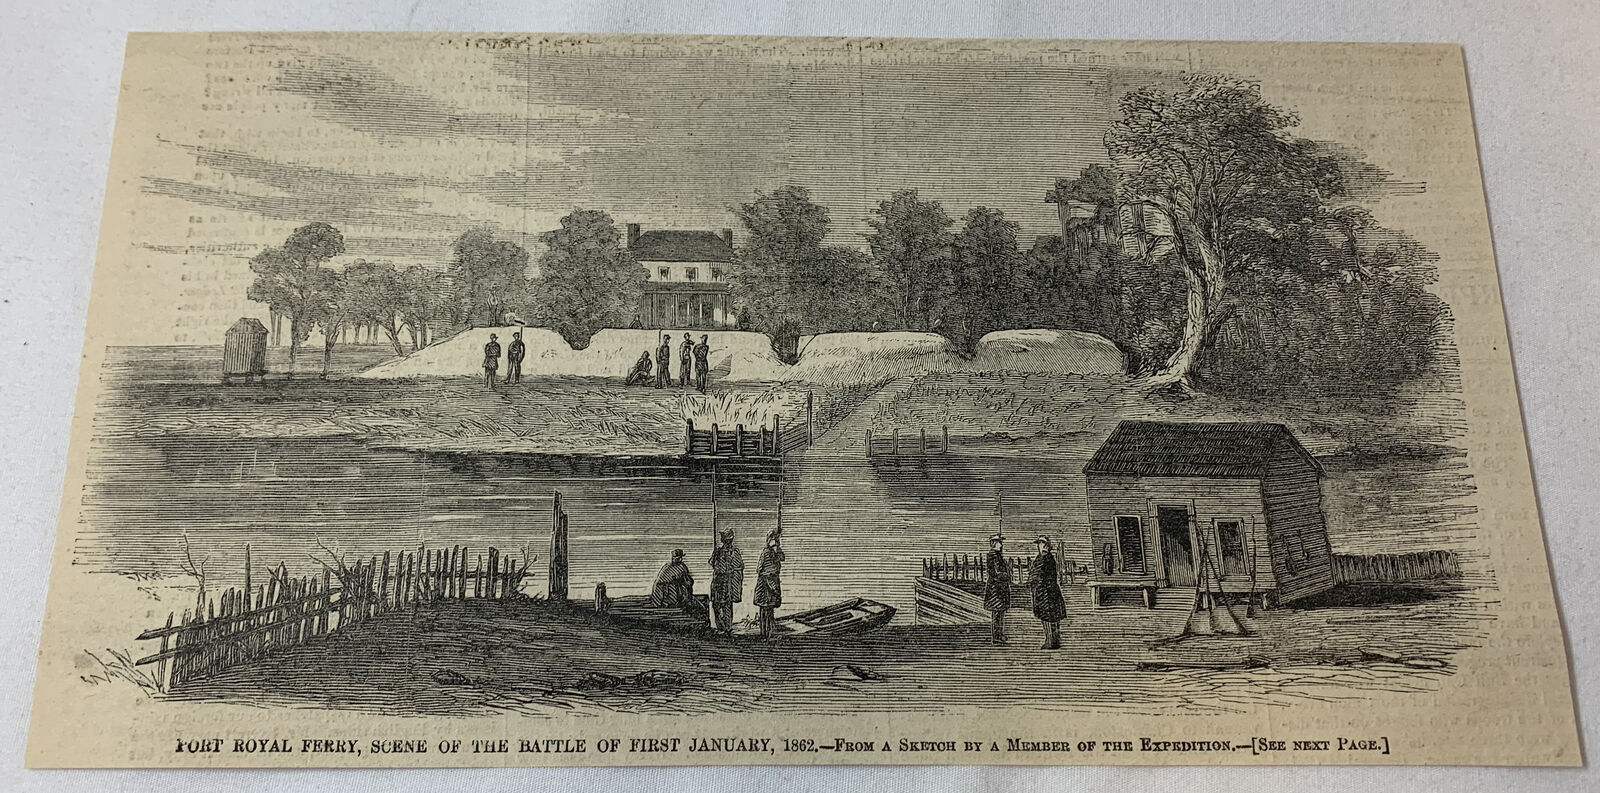 1862 magazine engraving~ PORT ROYAL FERRY, SCENE OF THE BATTLE OF FIRST JANUARY